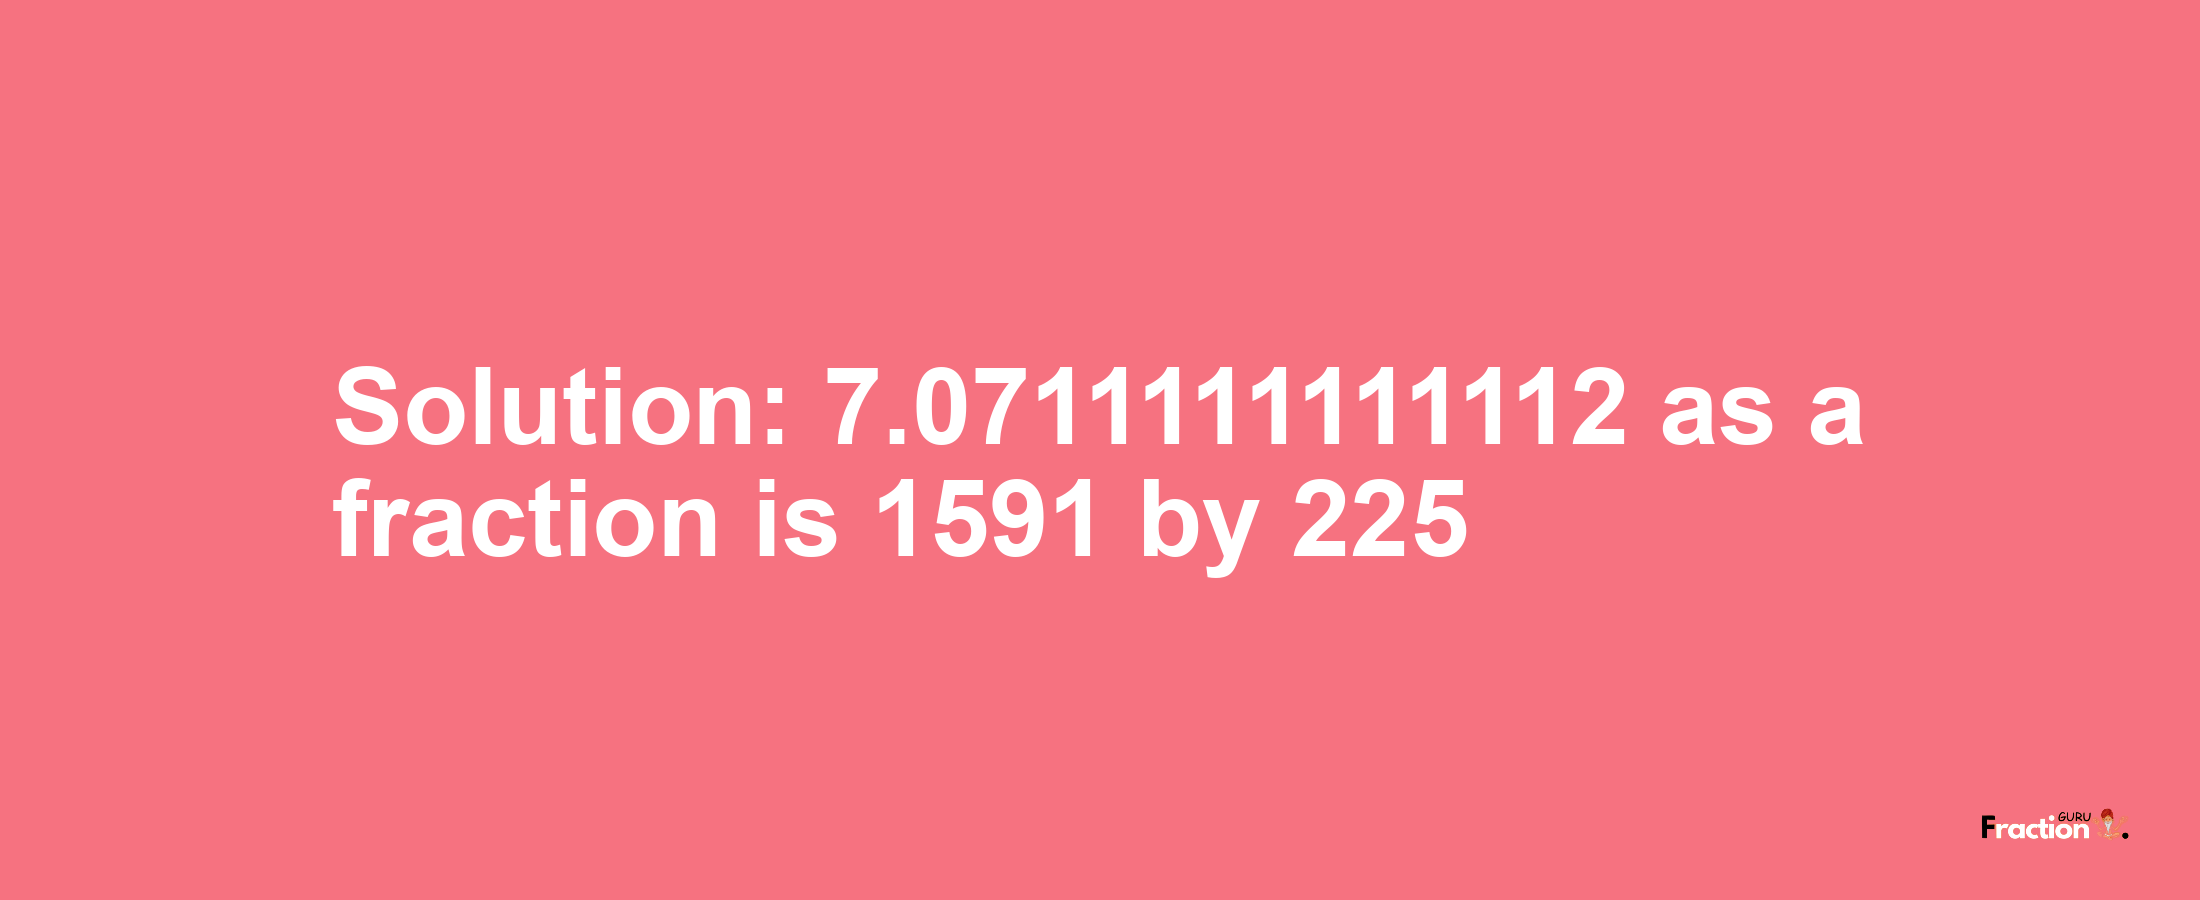 Solution:7.0711111111112 as a fraction is 1591/225